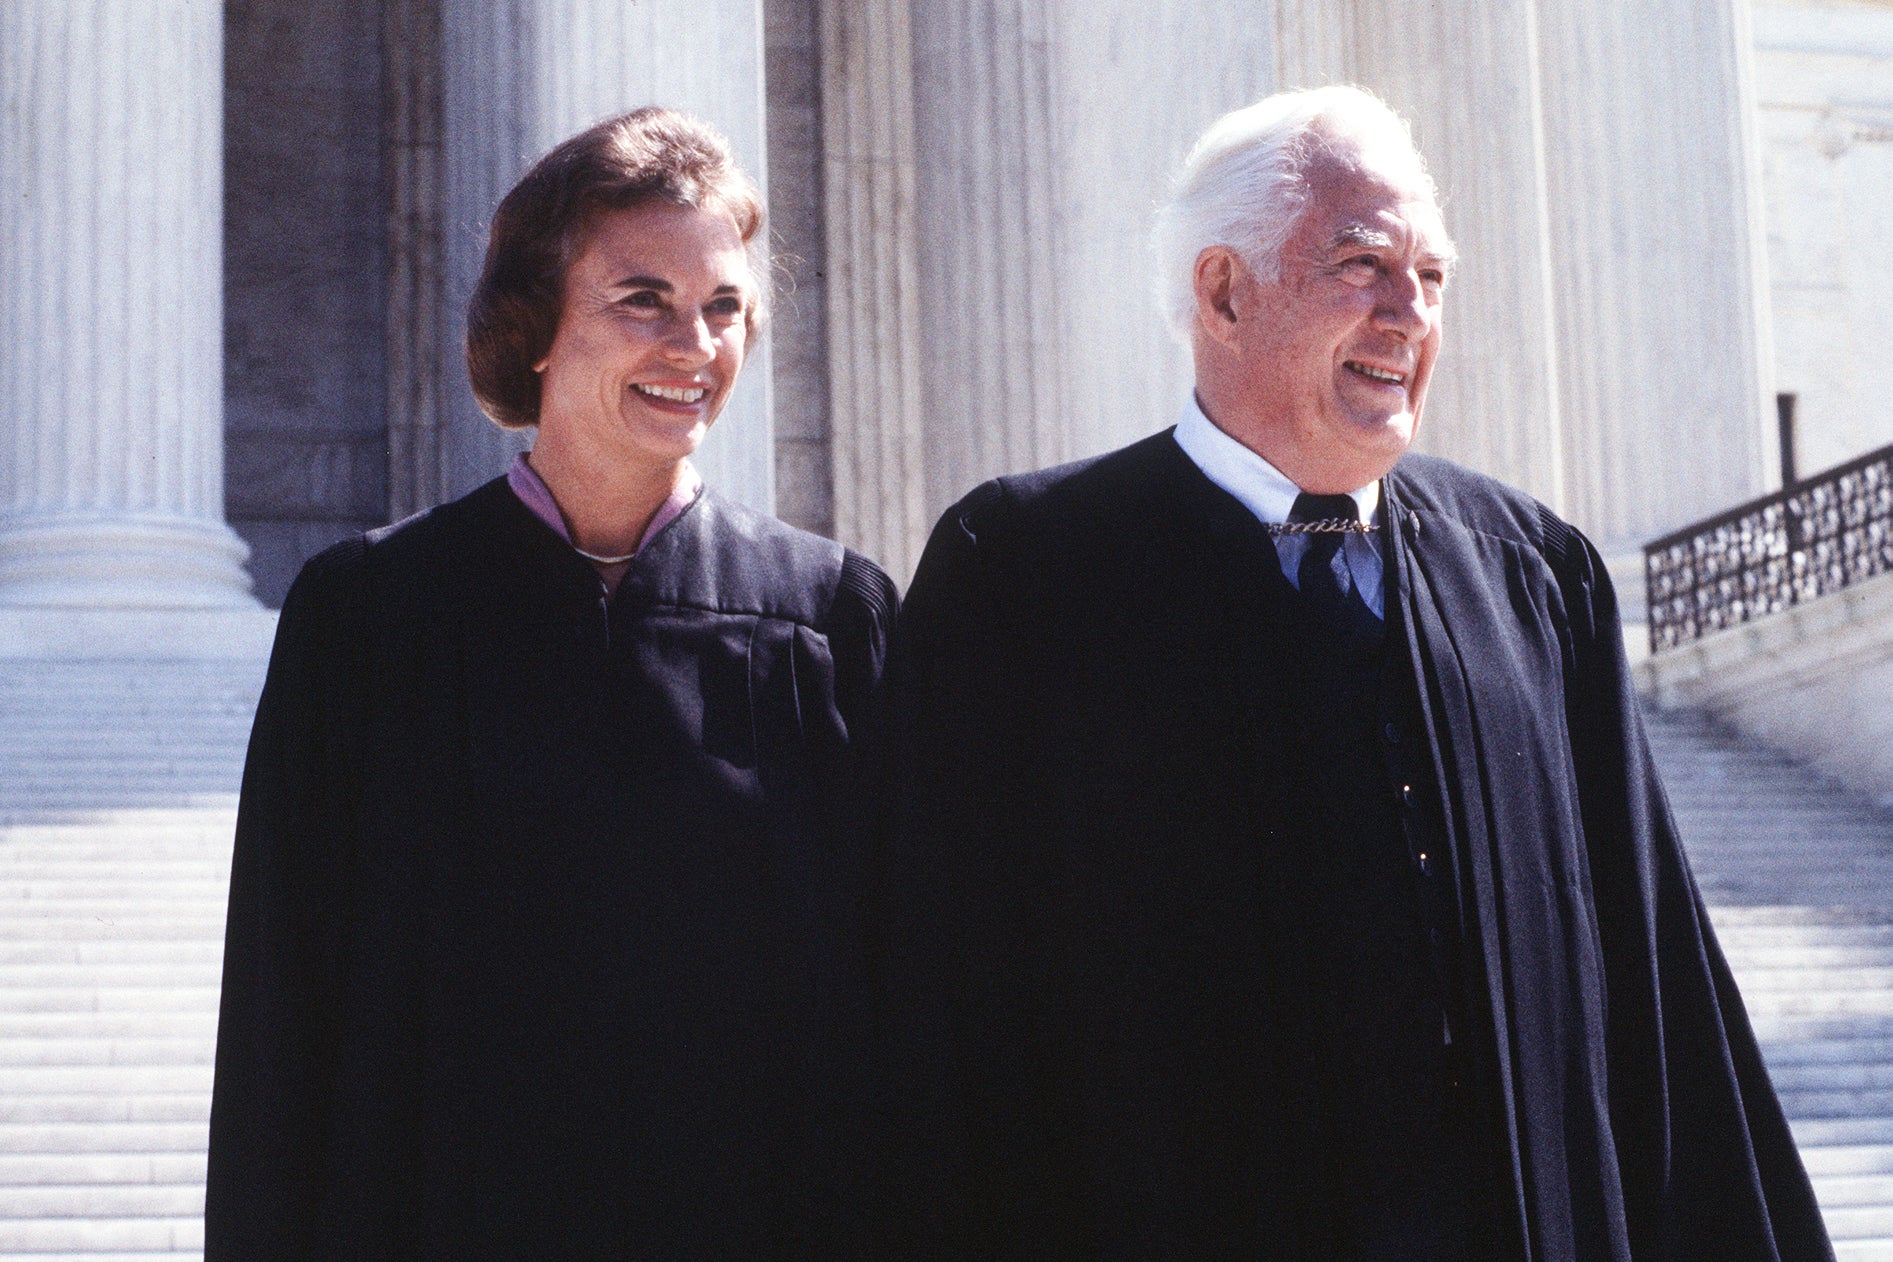 Supreme Court Associate Justice Sandra Day O'Connor with Chief Justice Warren Burger after her swearing in at the Supreme Court in Washington in September 1981